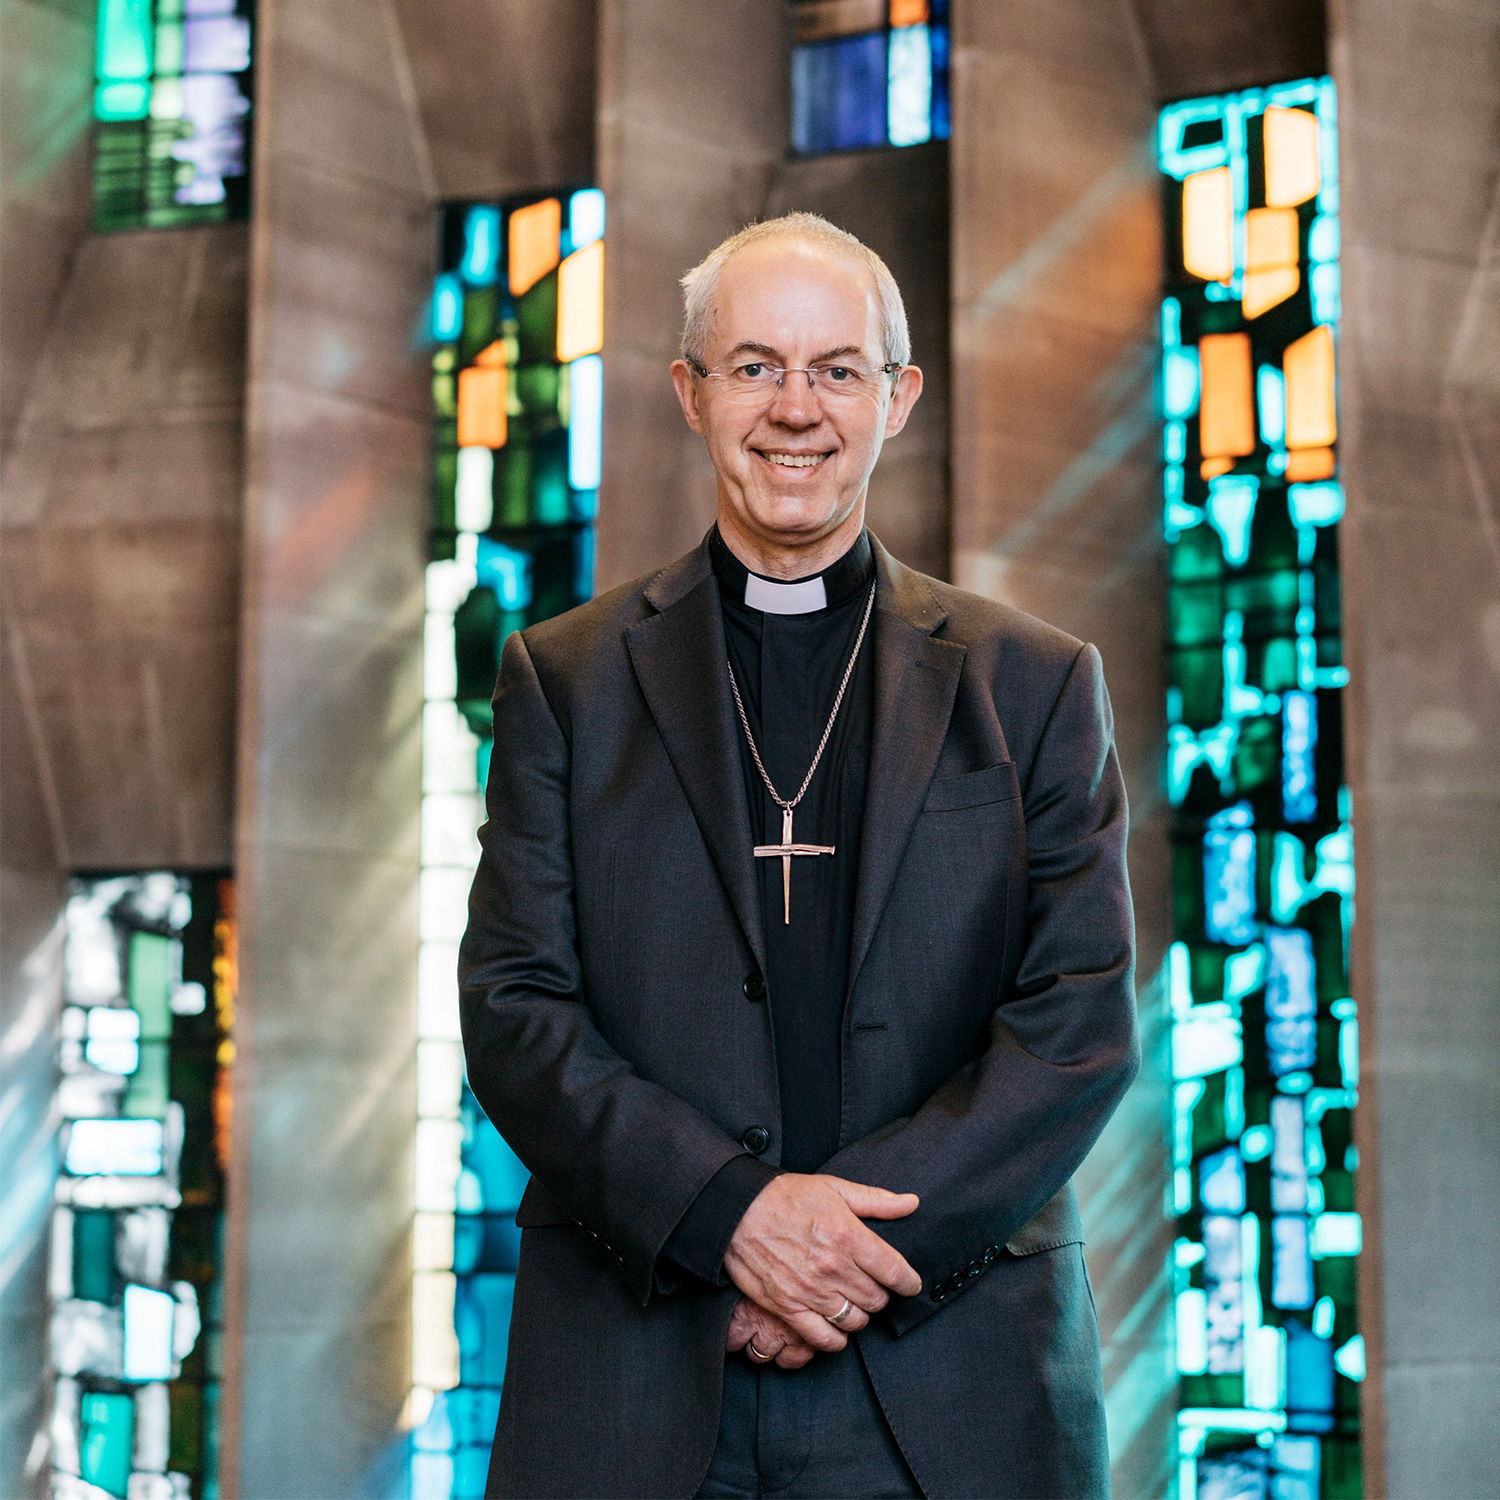 The Archbishop stands smiling in front a beautiful coloured stained glass window